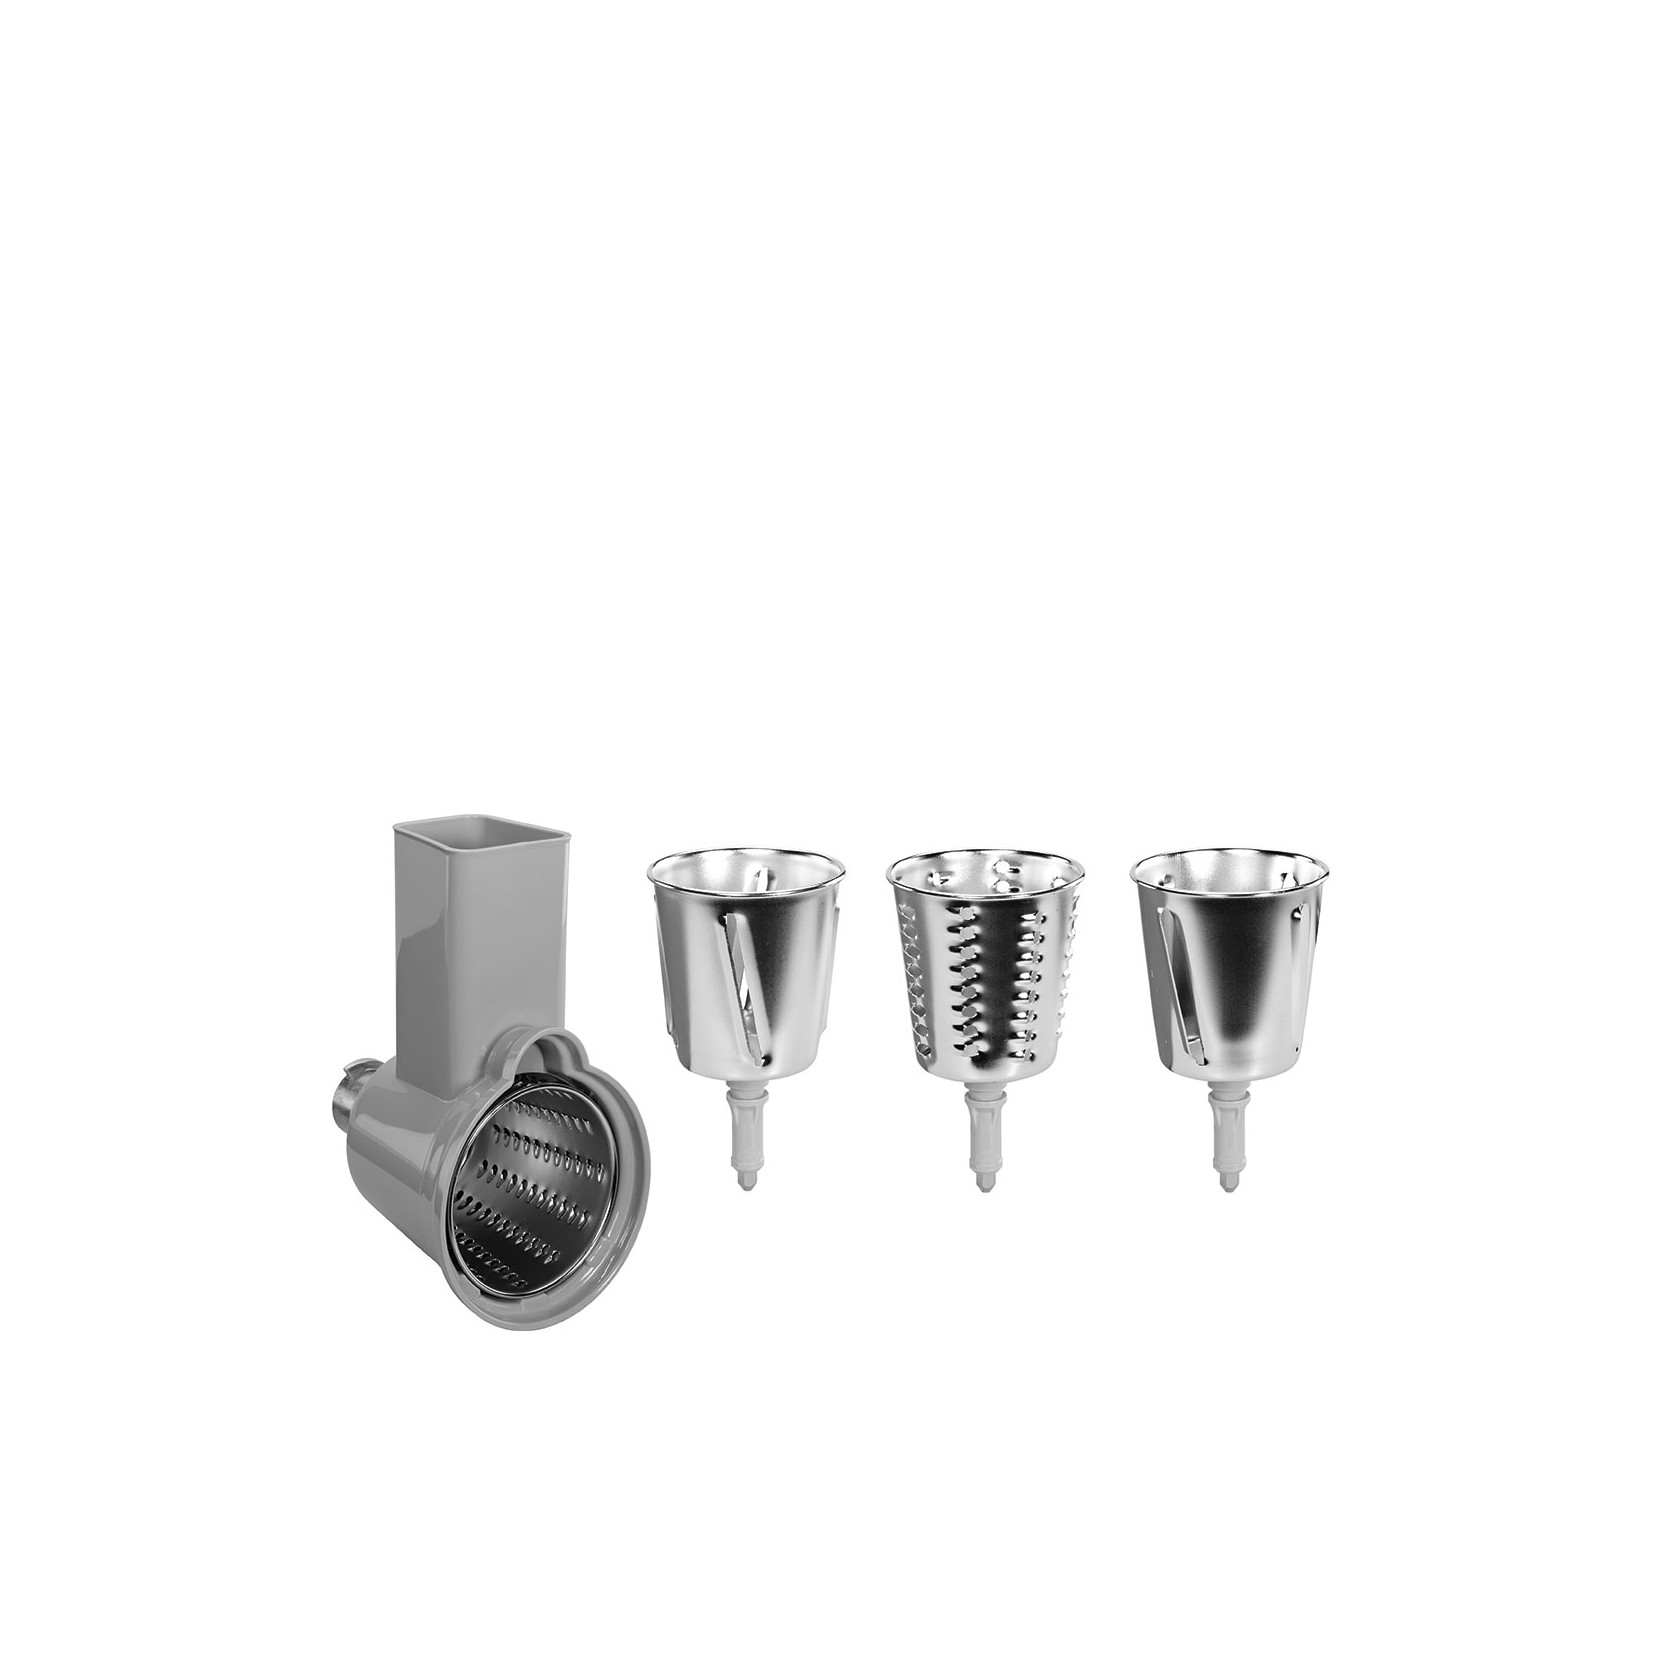 Smeg Accessories for Stand Mixer Slicer & grater